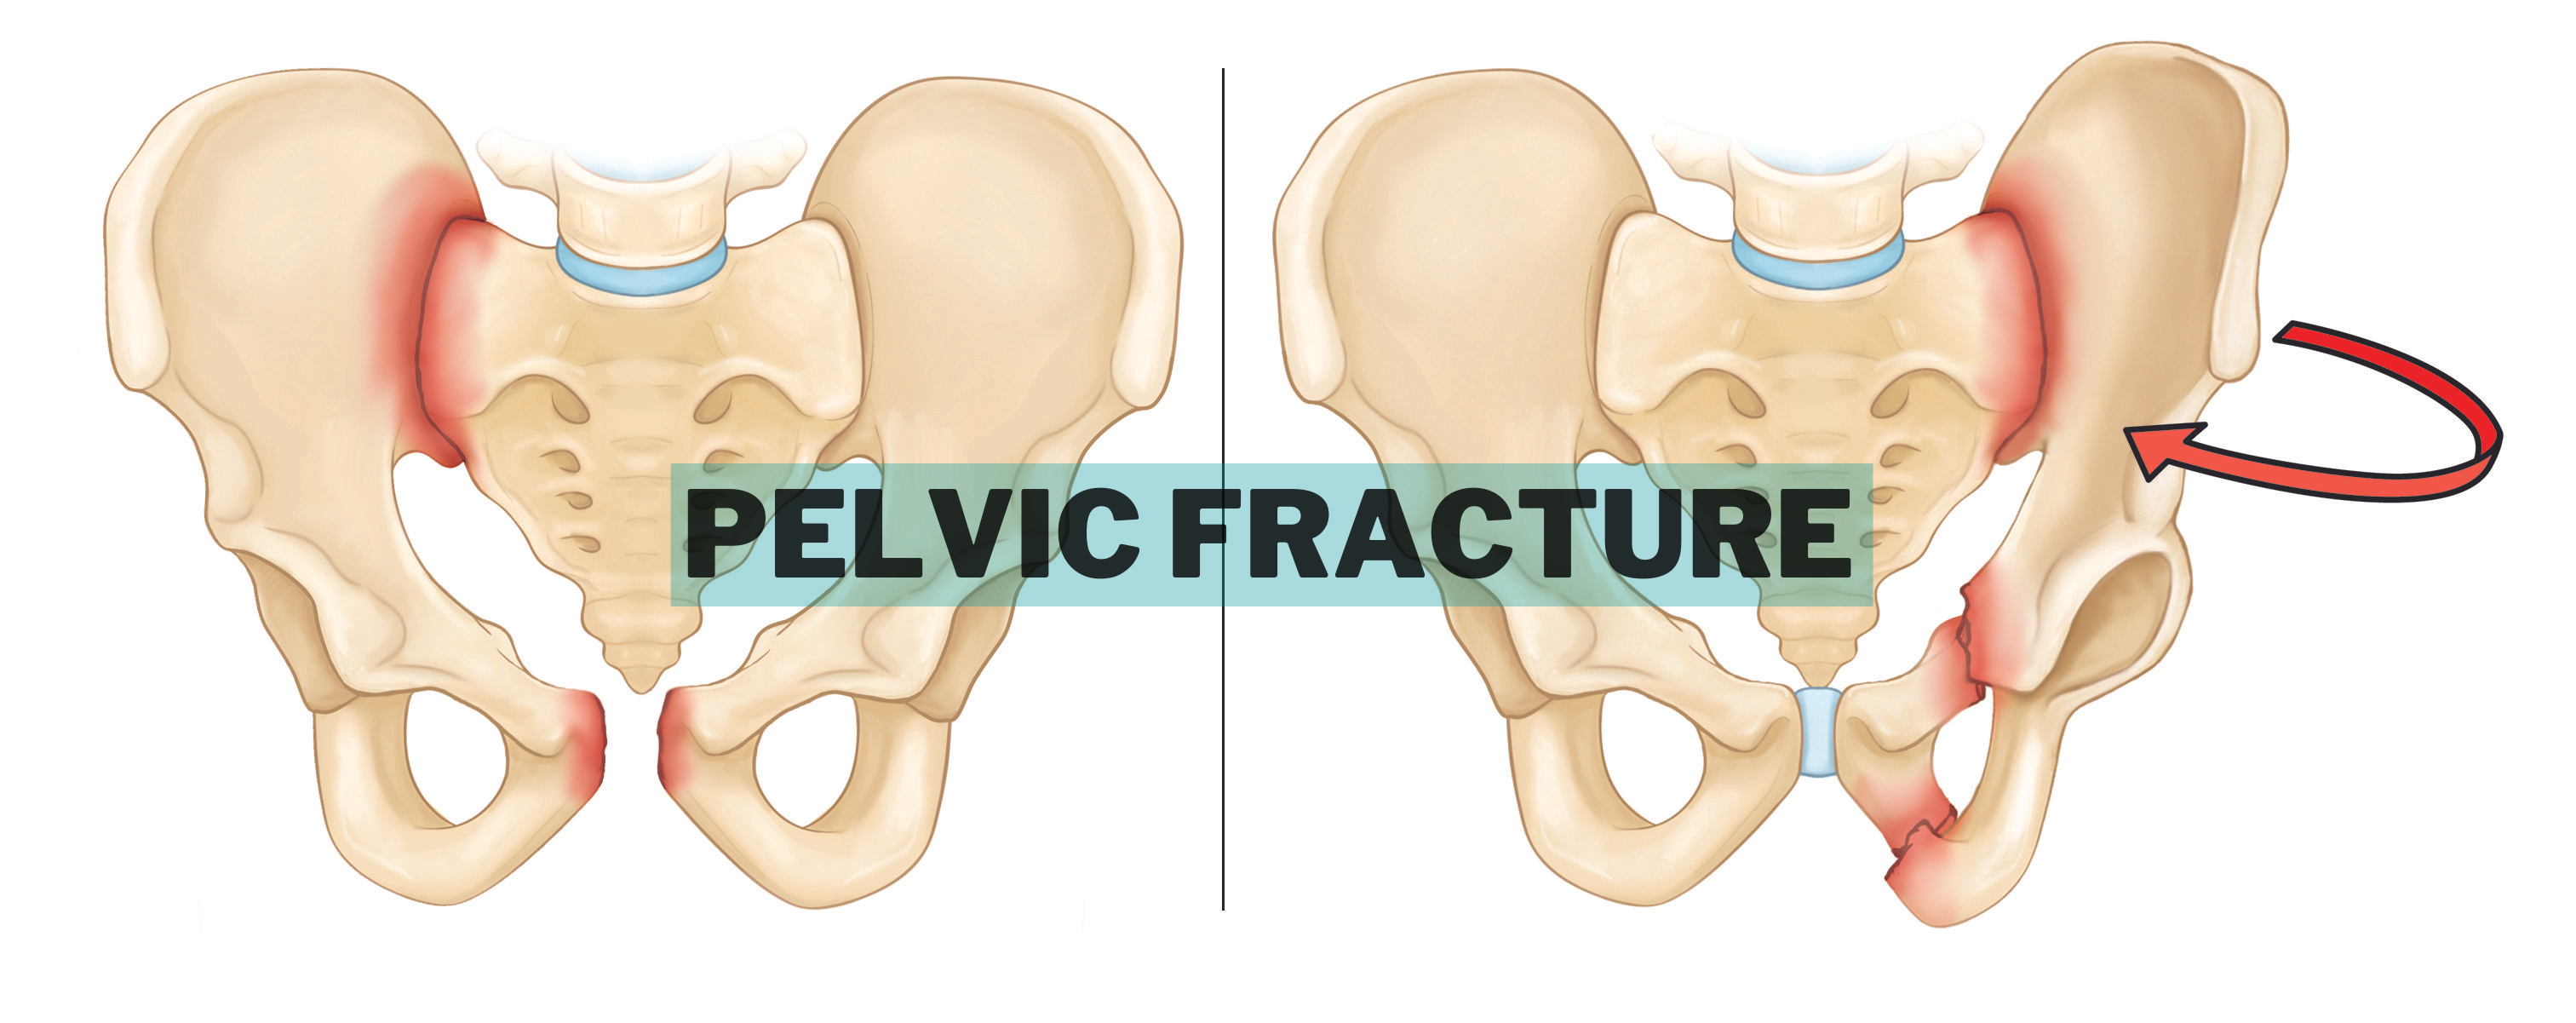 Pelvic fracture (featured Image)